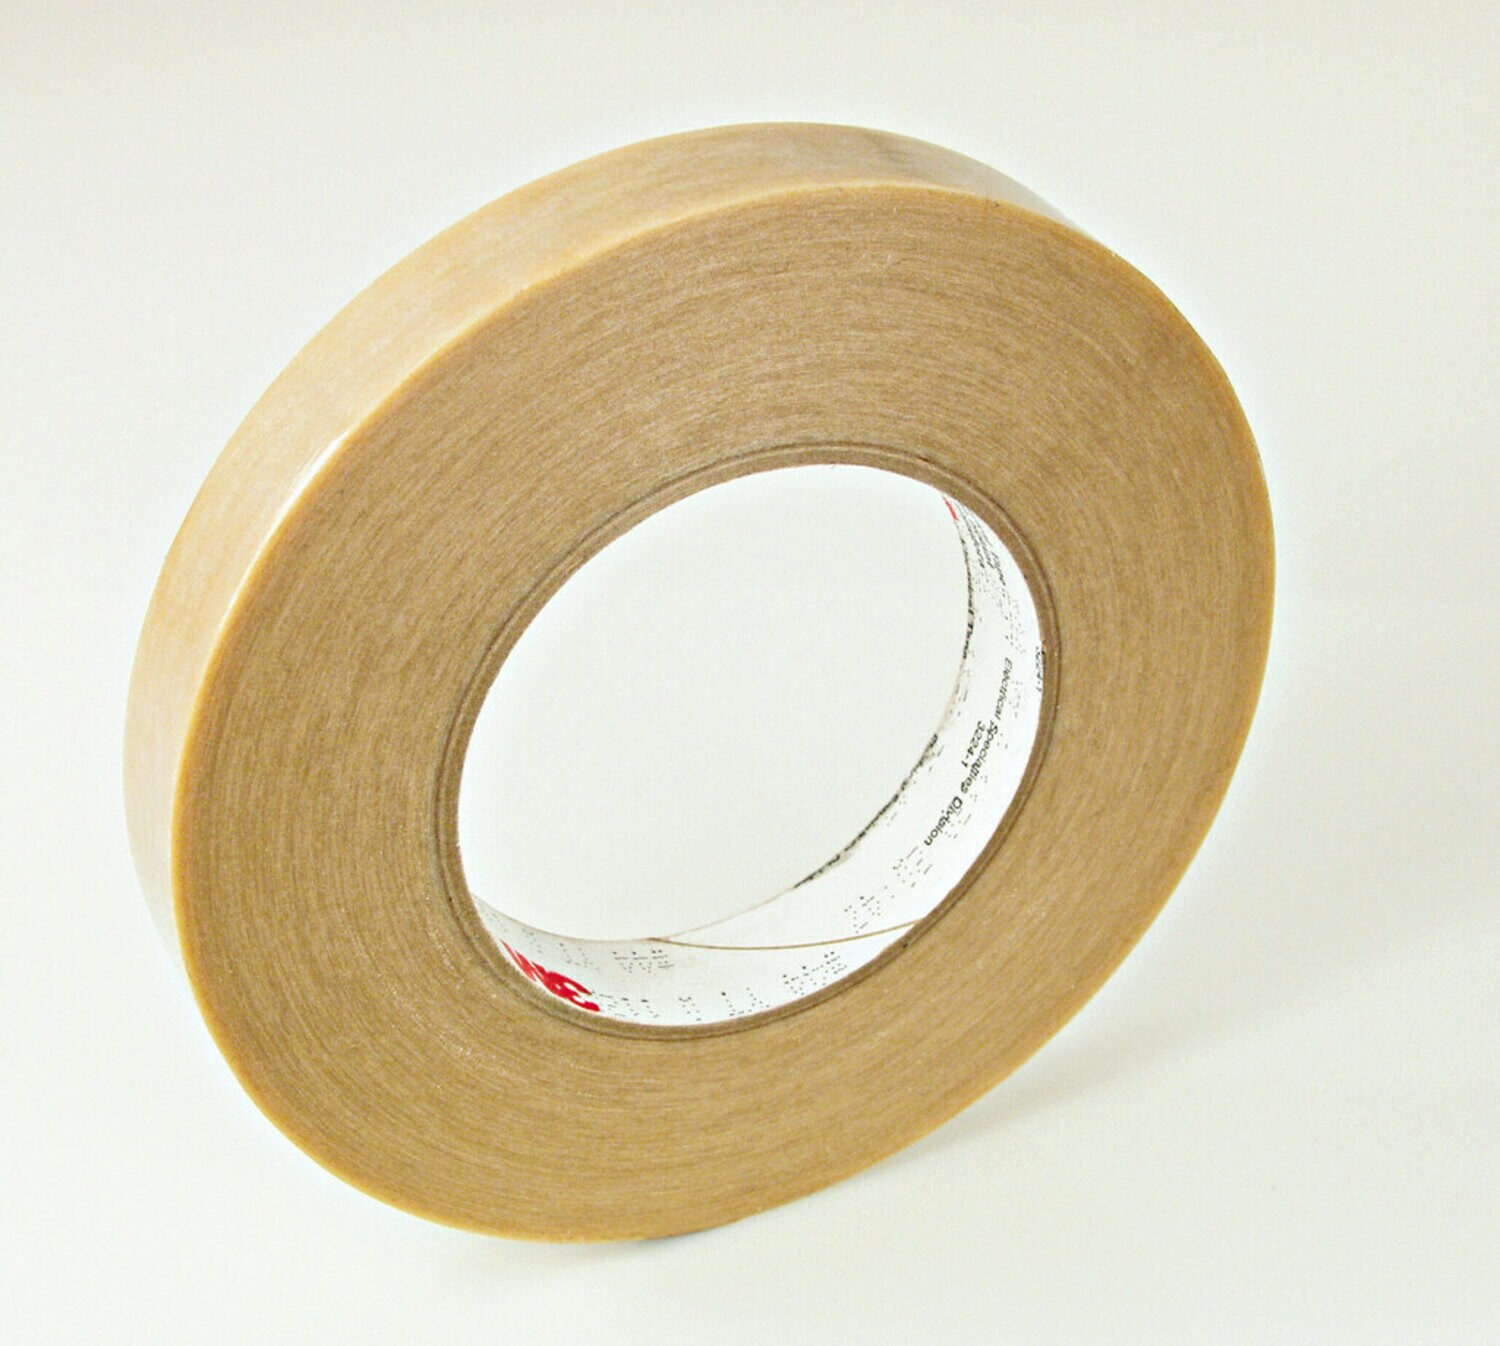 7010293667 - 3M Composite Film Electrical Tape 44, 23-1/2 in x 120 yd, 3 in Paper
Core, Log Roll Untrimmed, 1 Roll/Case